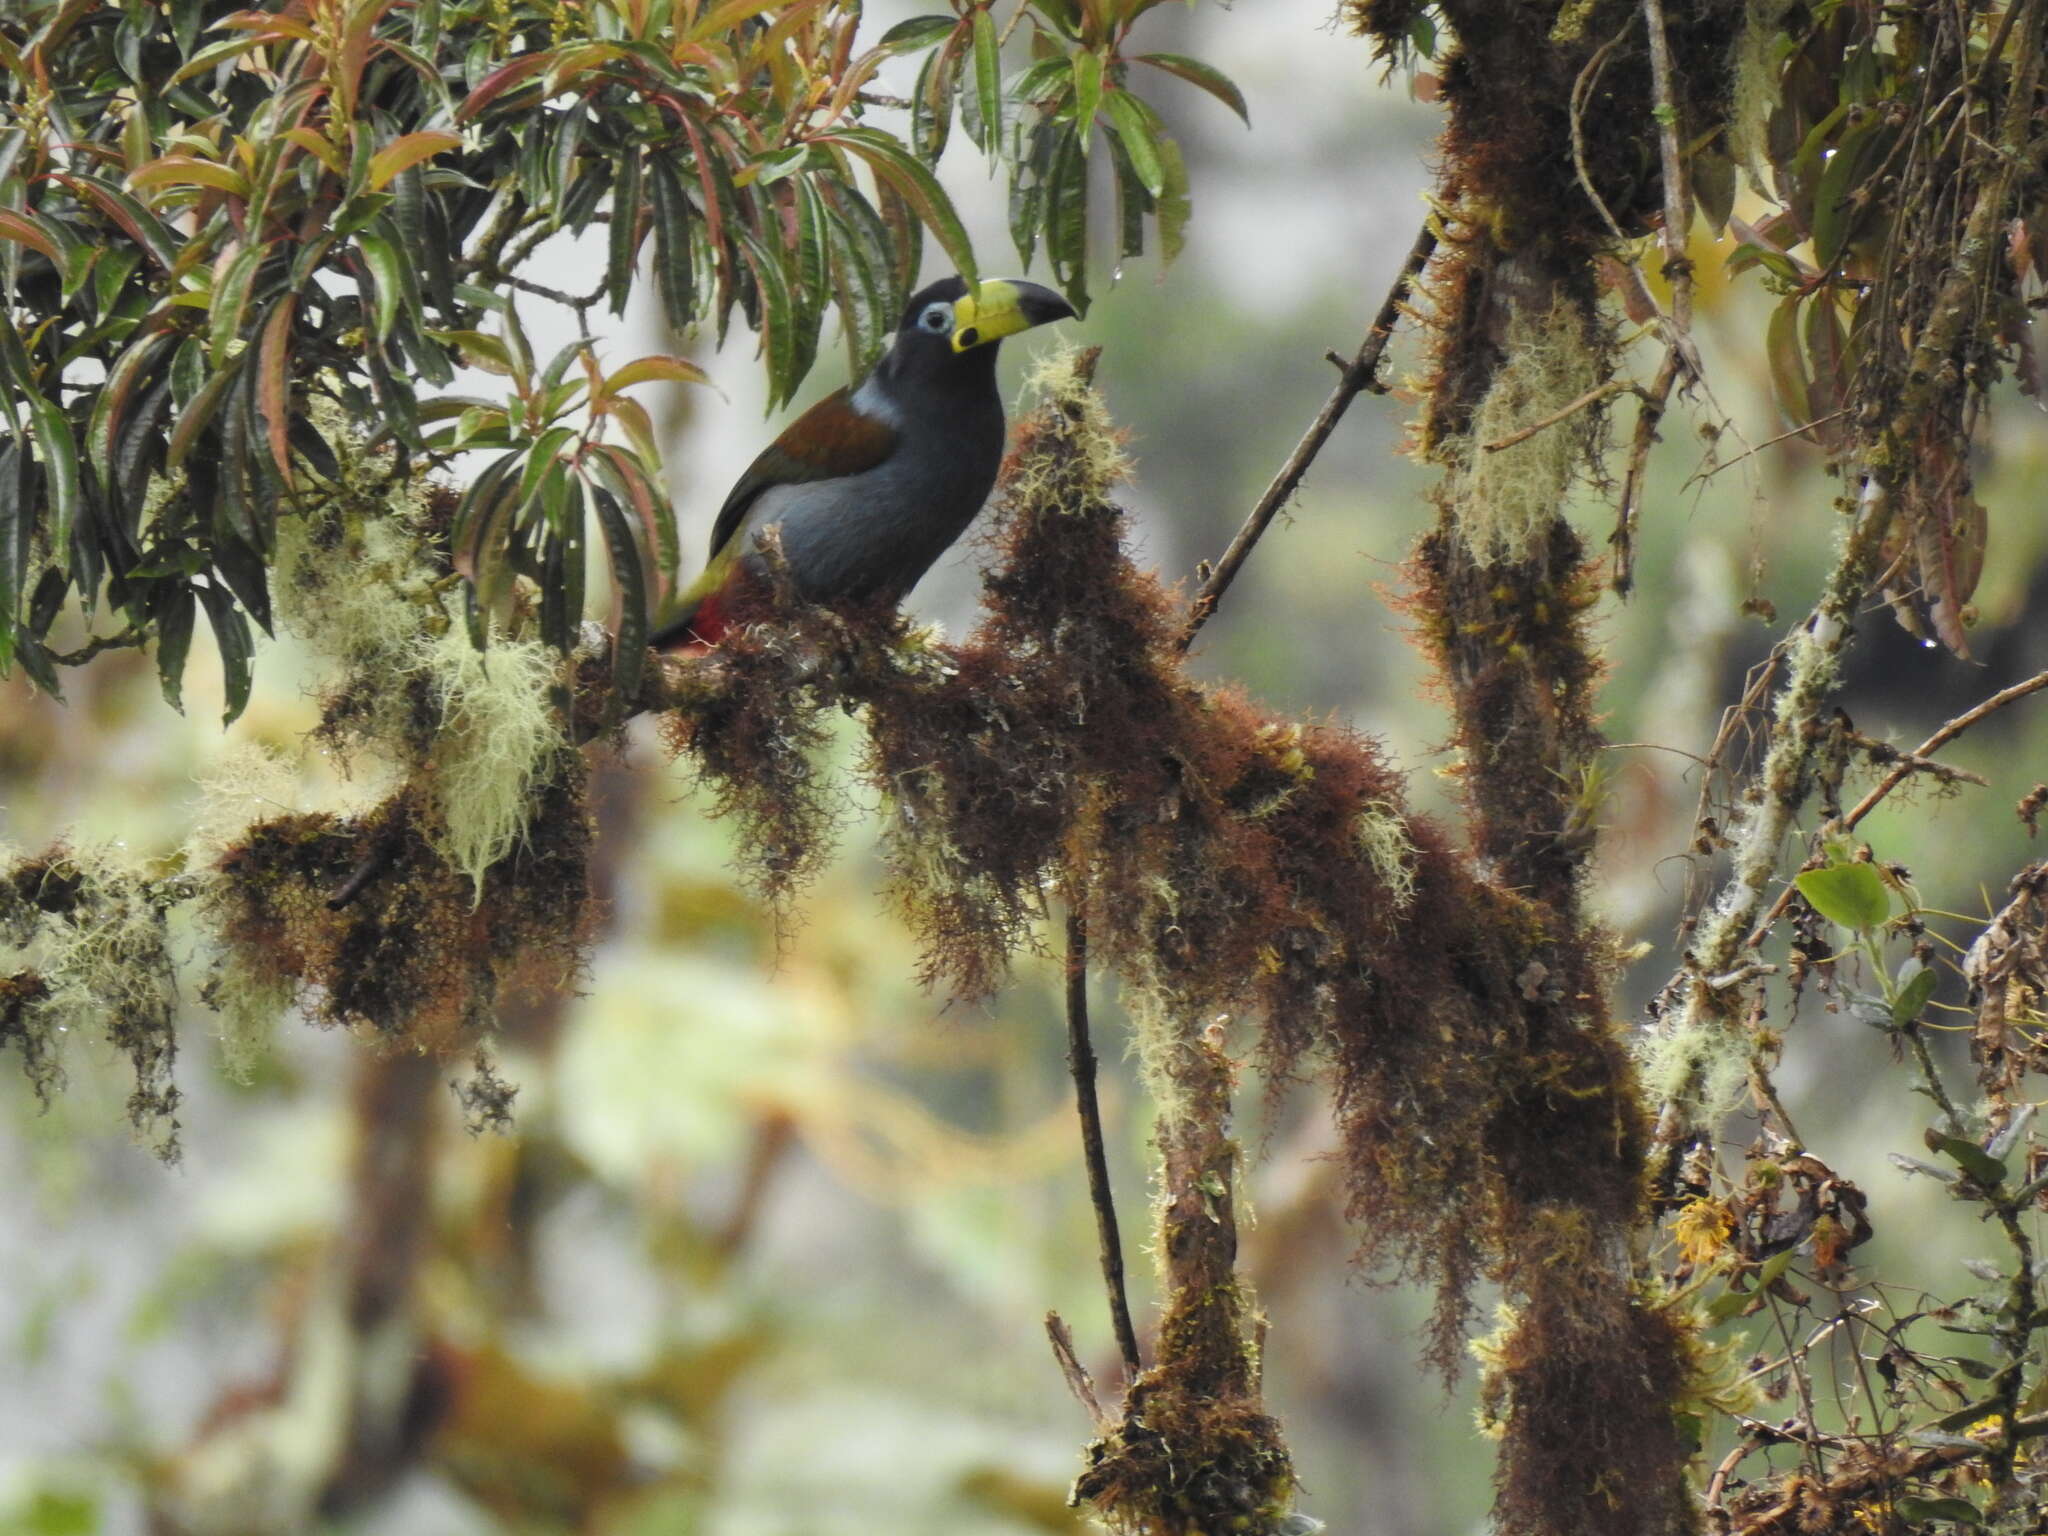 Image of Hooded Mountain Toucan